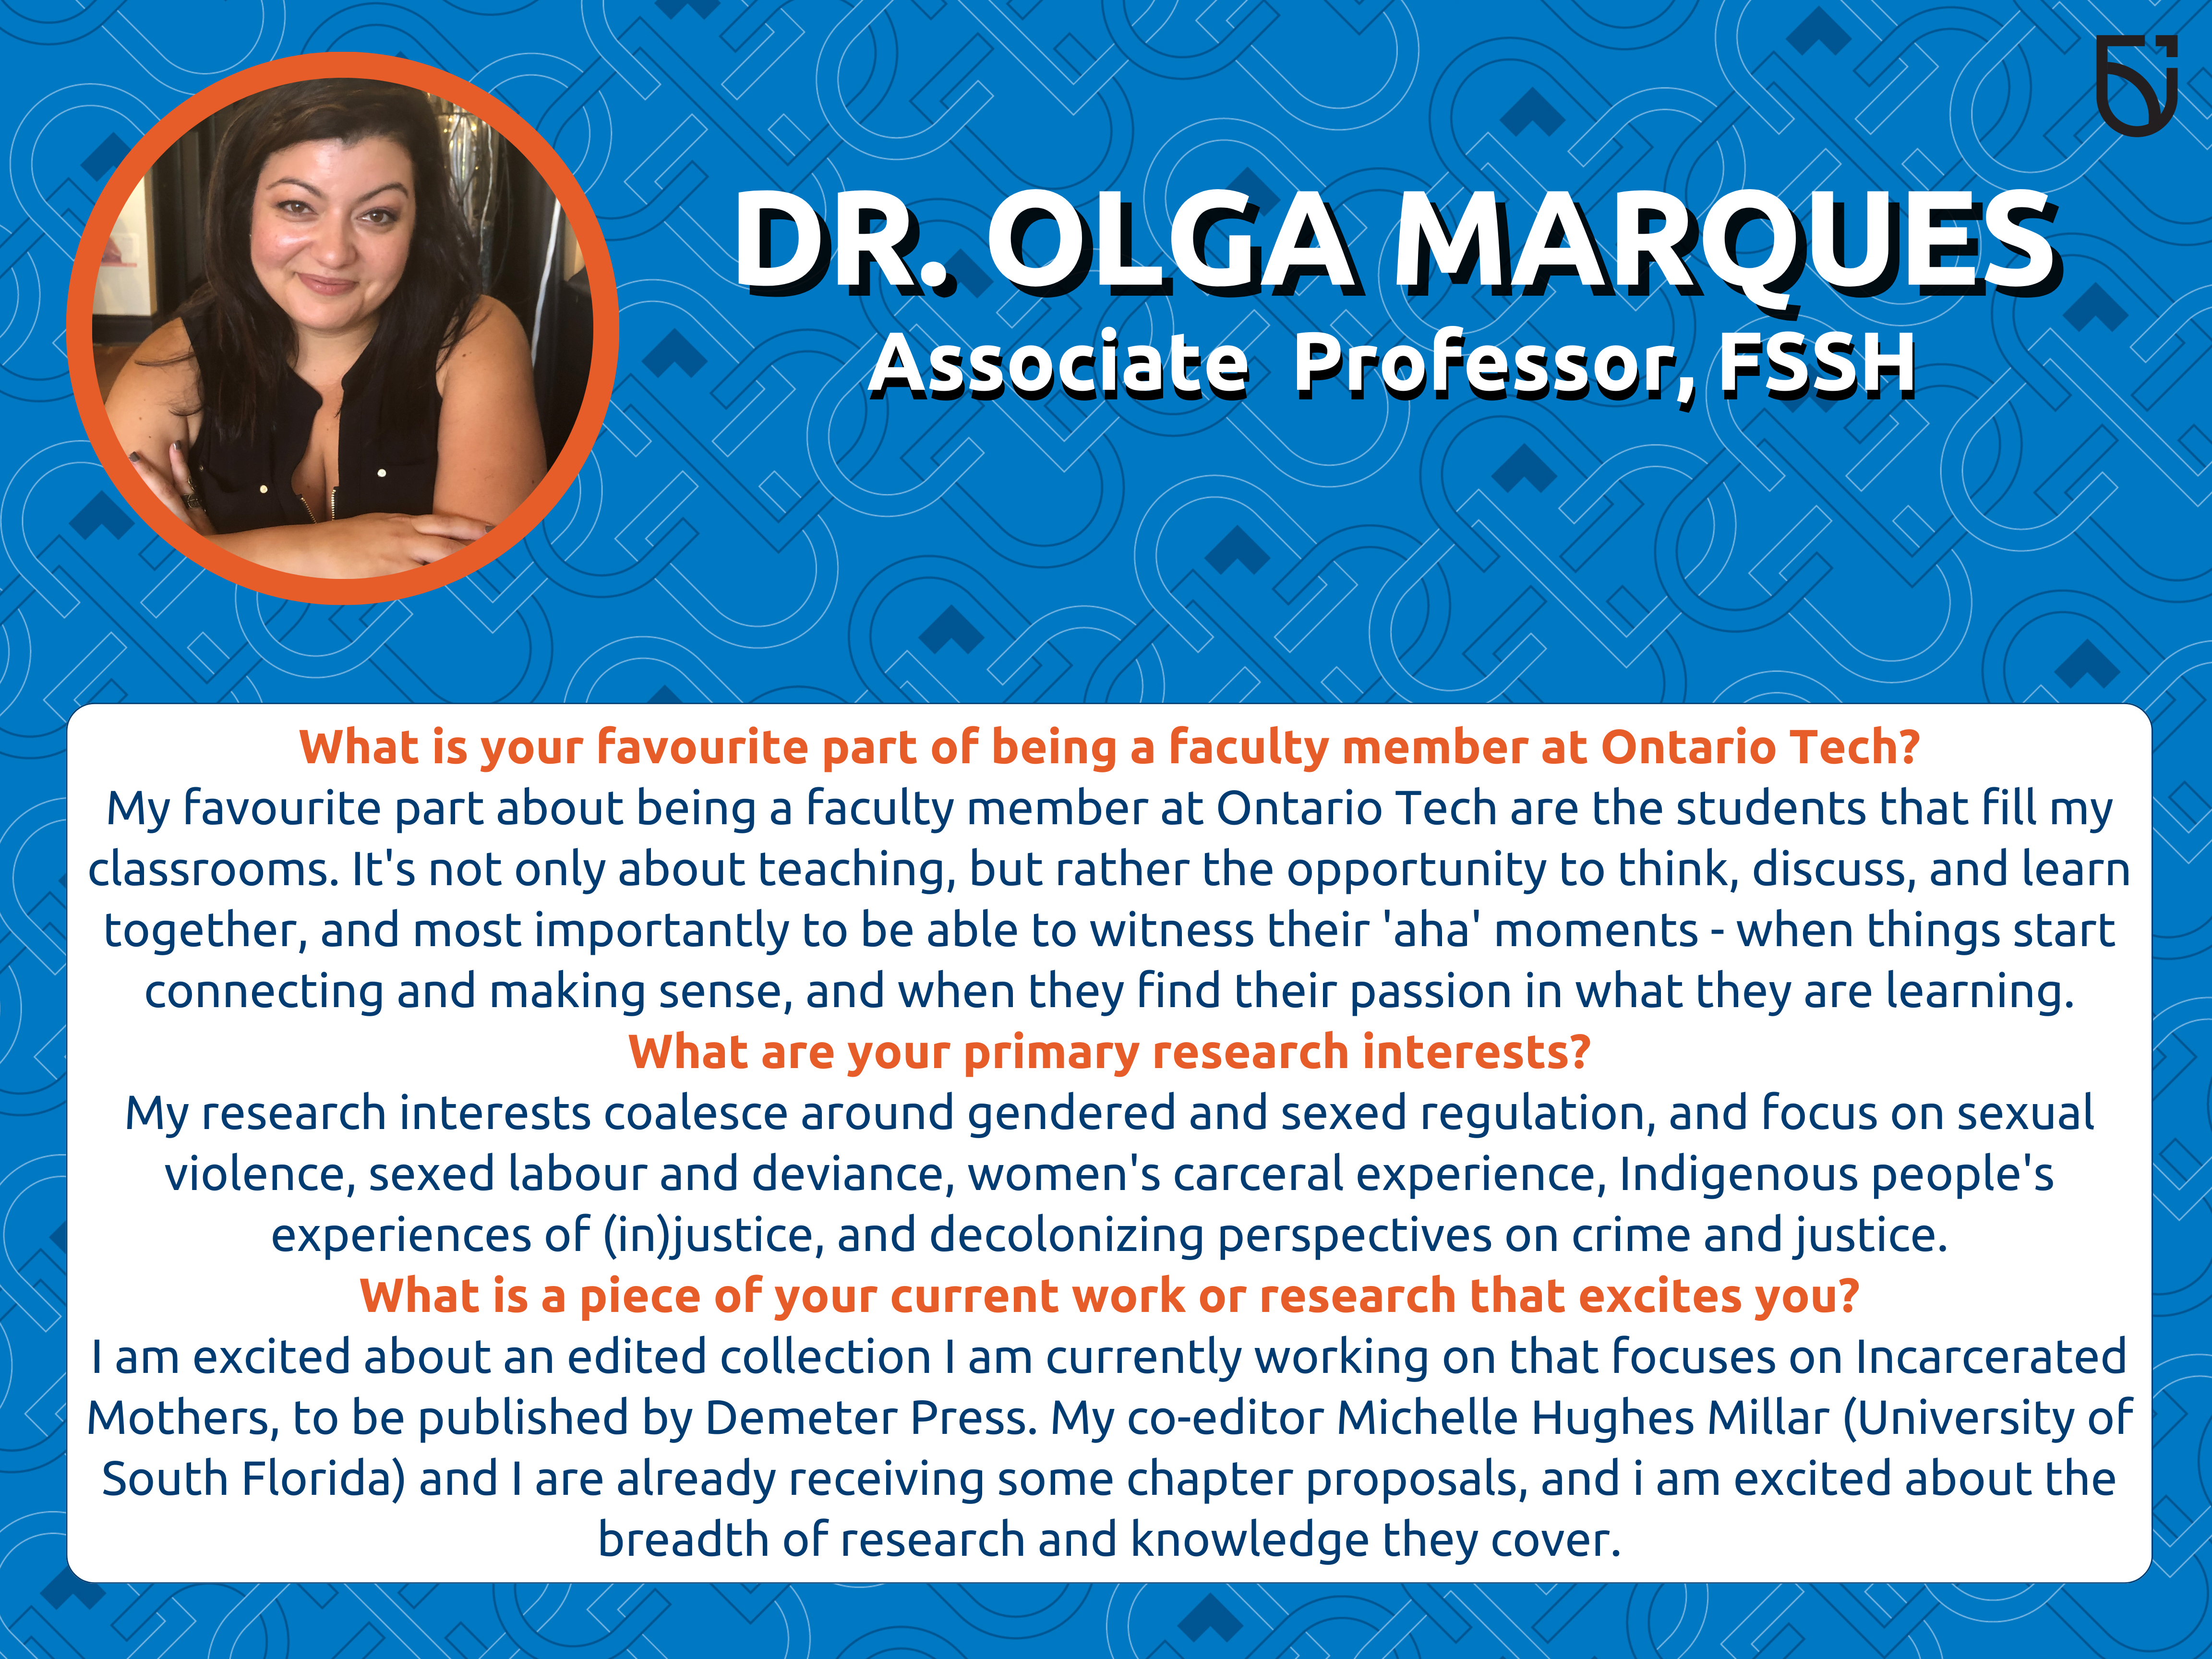 This photo is a Women’s Wednesday feature of Dr. Olga Marques, an Associate Professor in the Faculty of Social Science and Humanities.